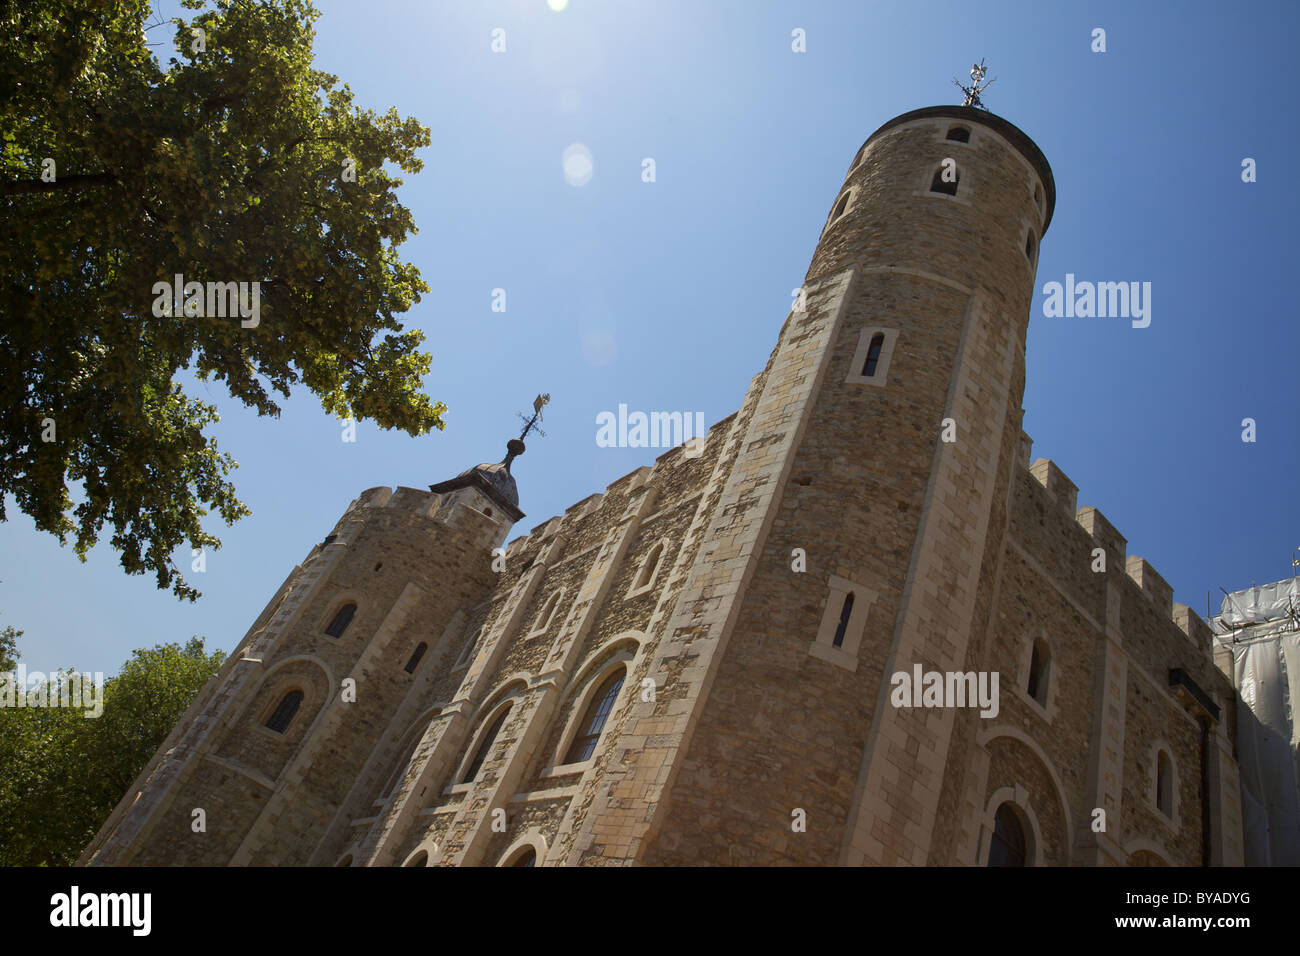 The Tower of London, Stock Photo